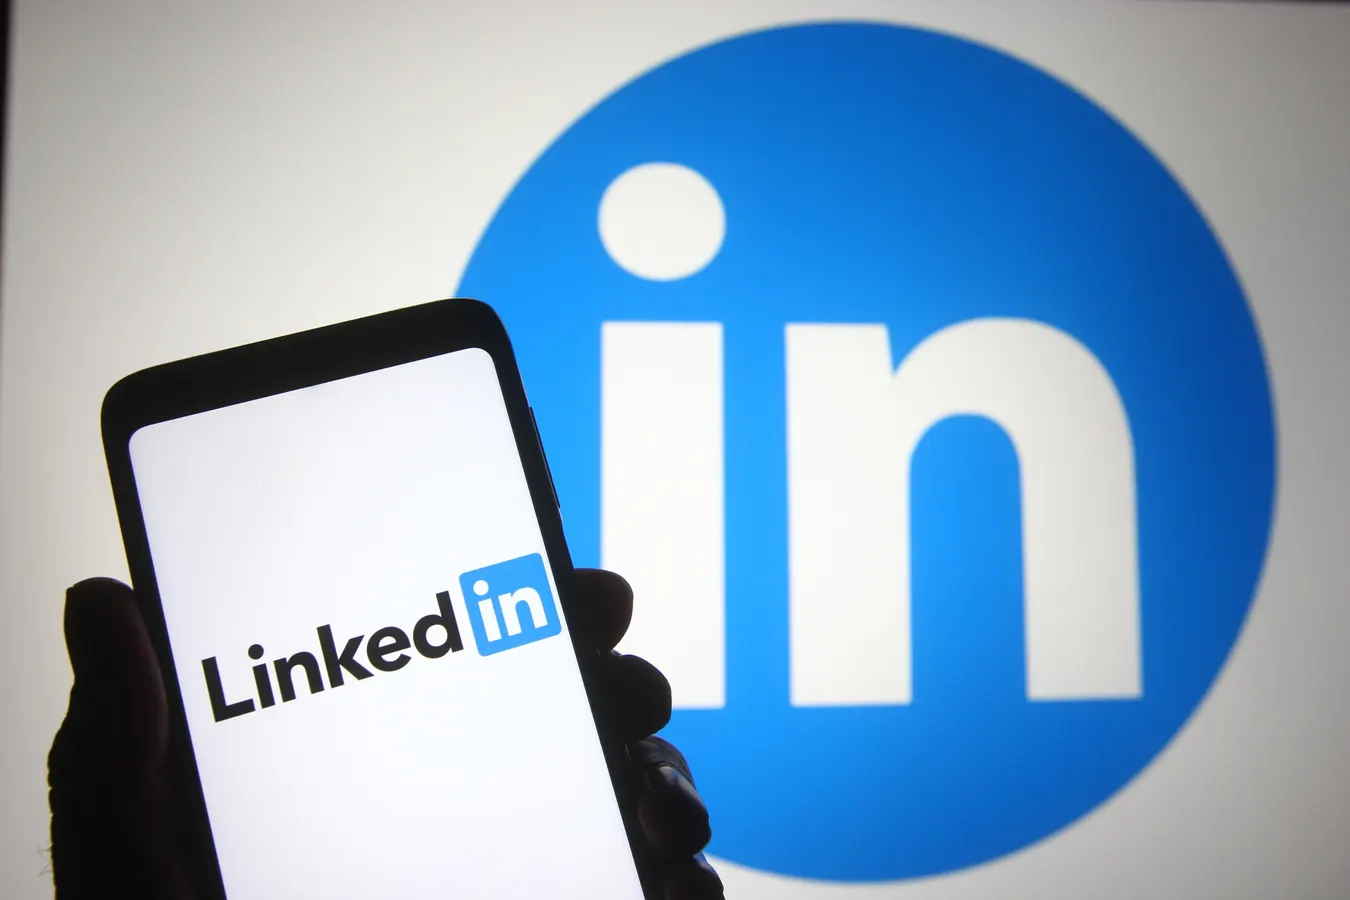 LinkedIn is adding games to the platform. Here are some reasons